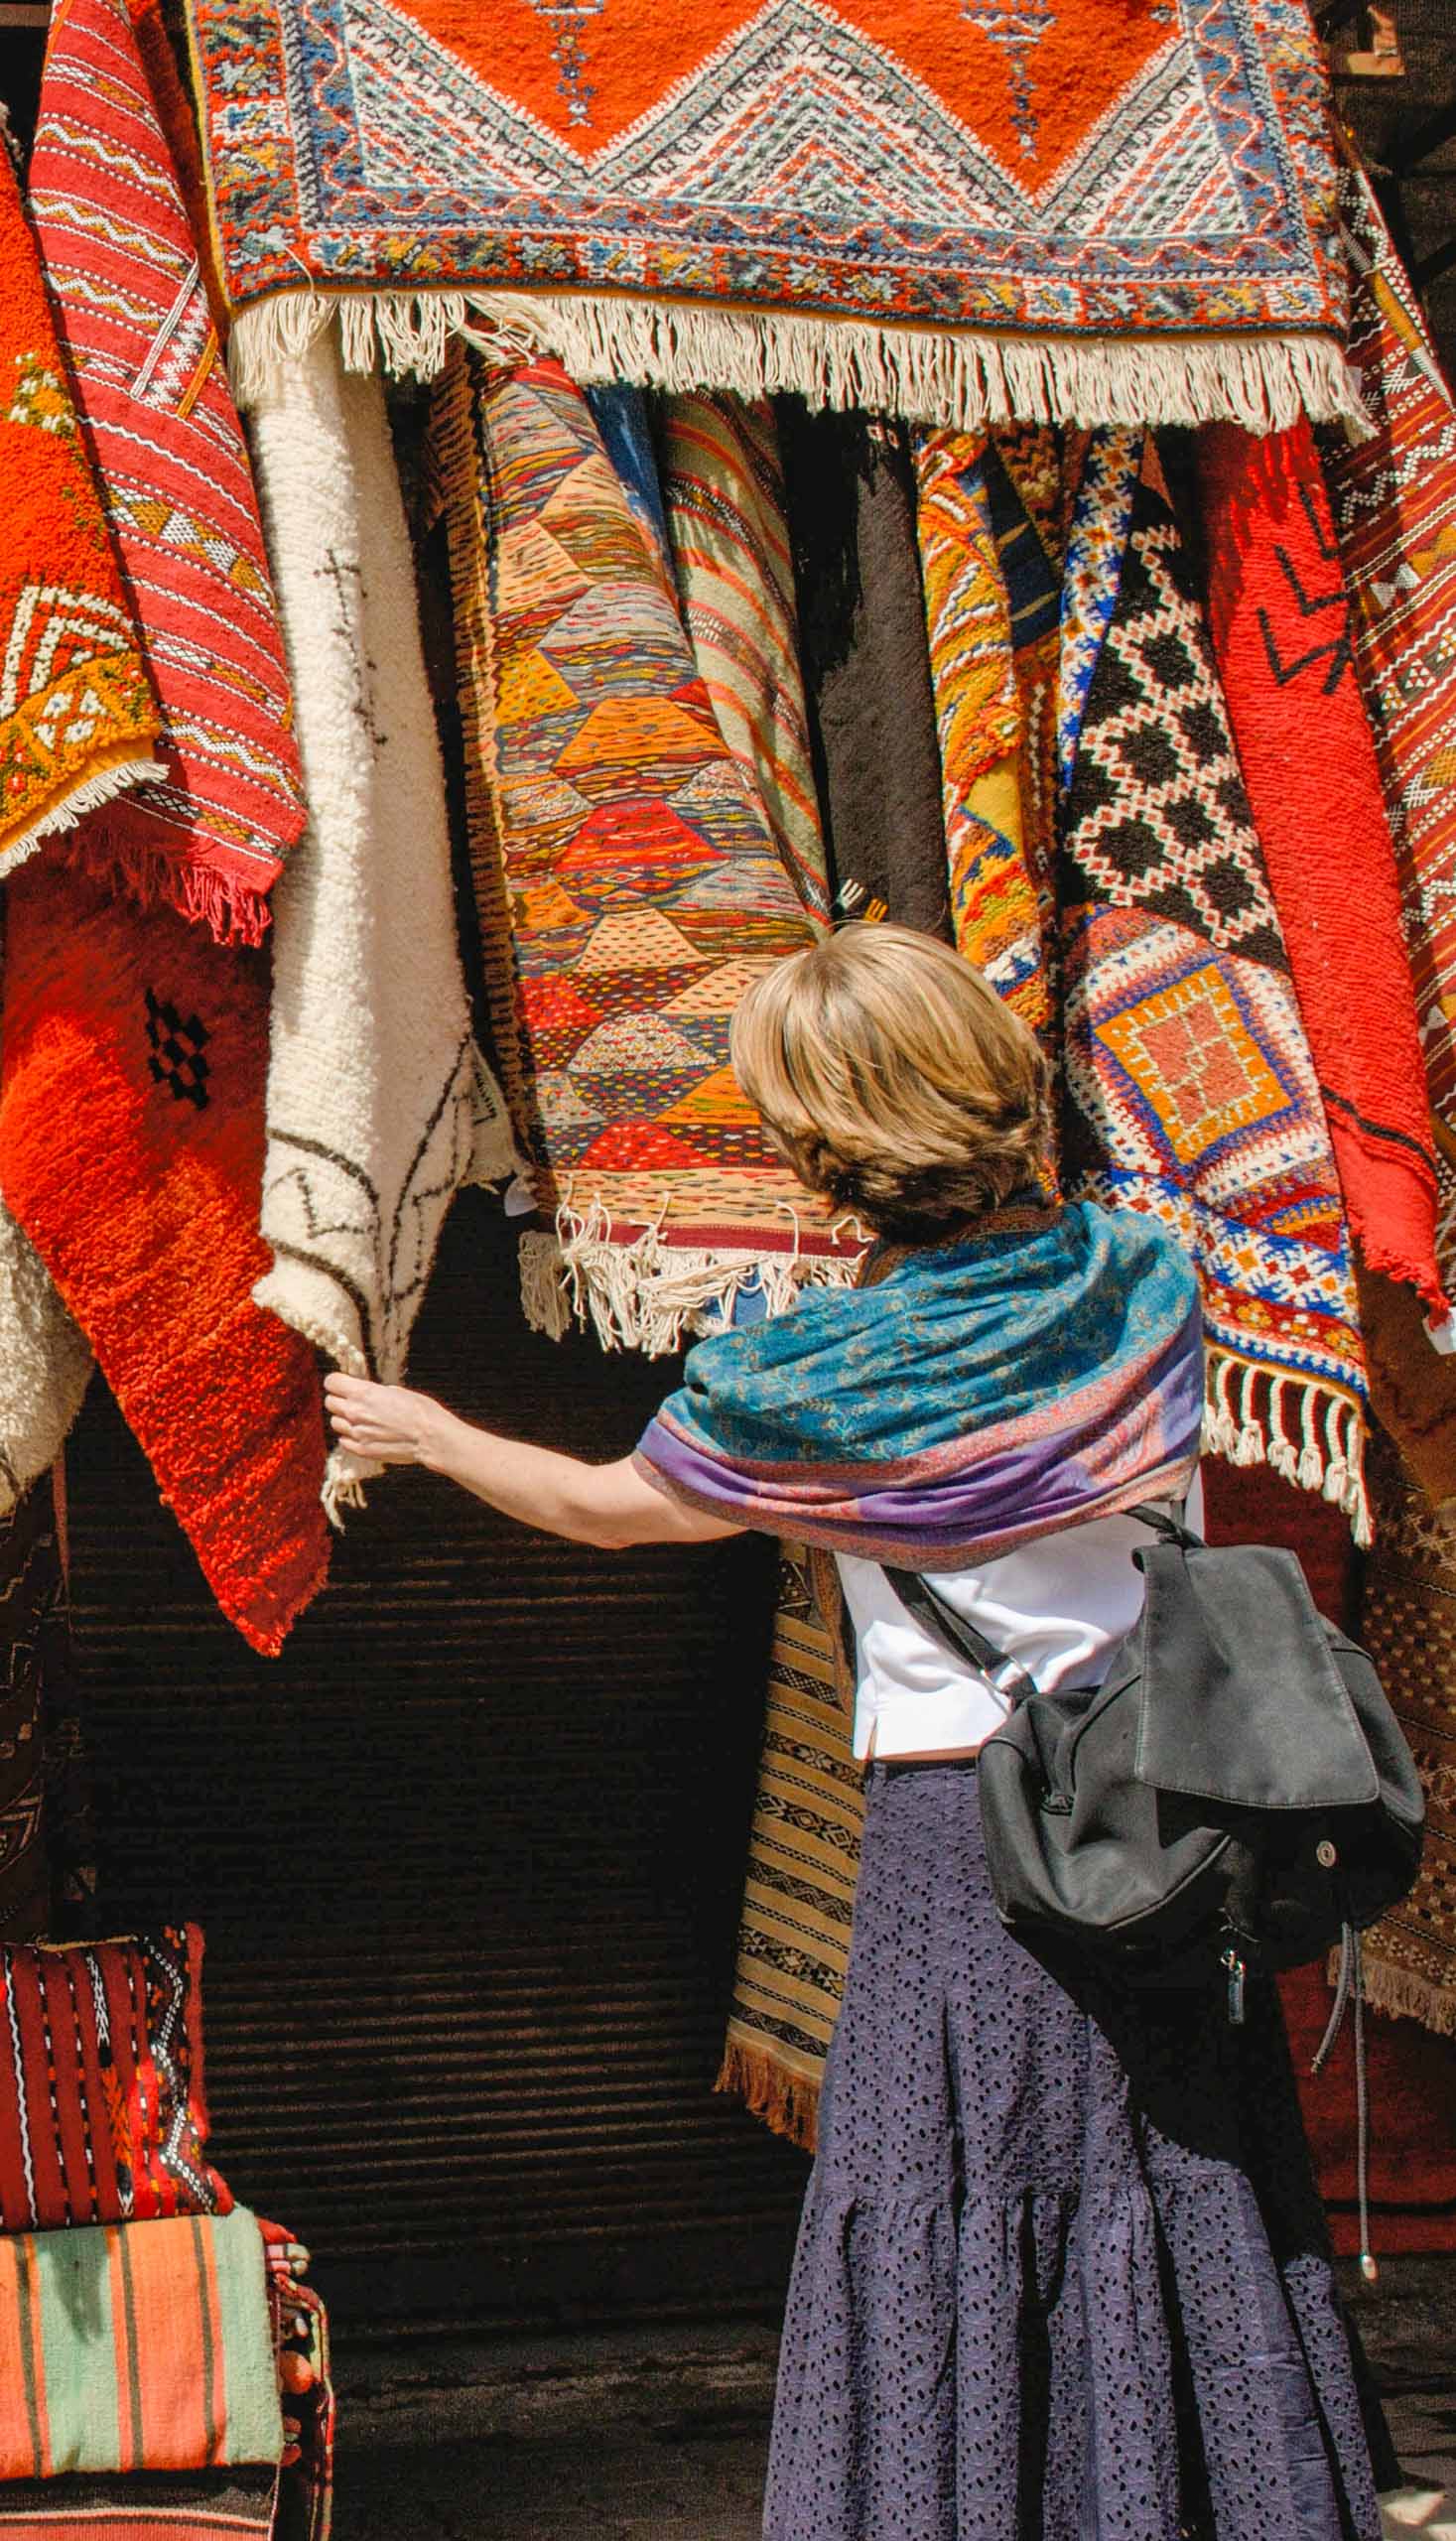 A tourist browsing through rugs in a market in Marrakech.